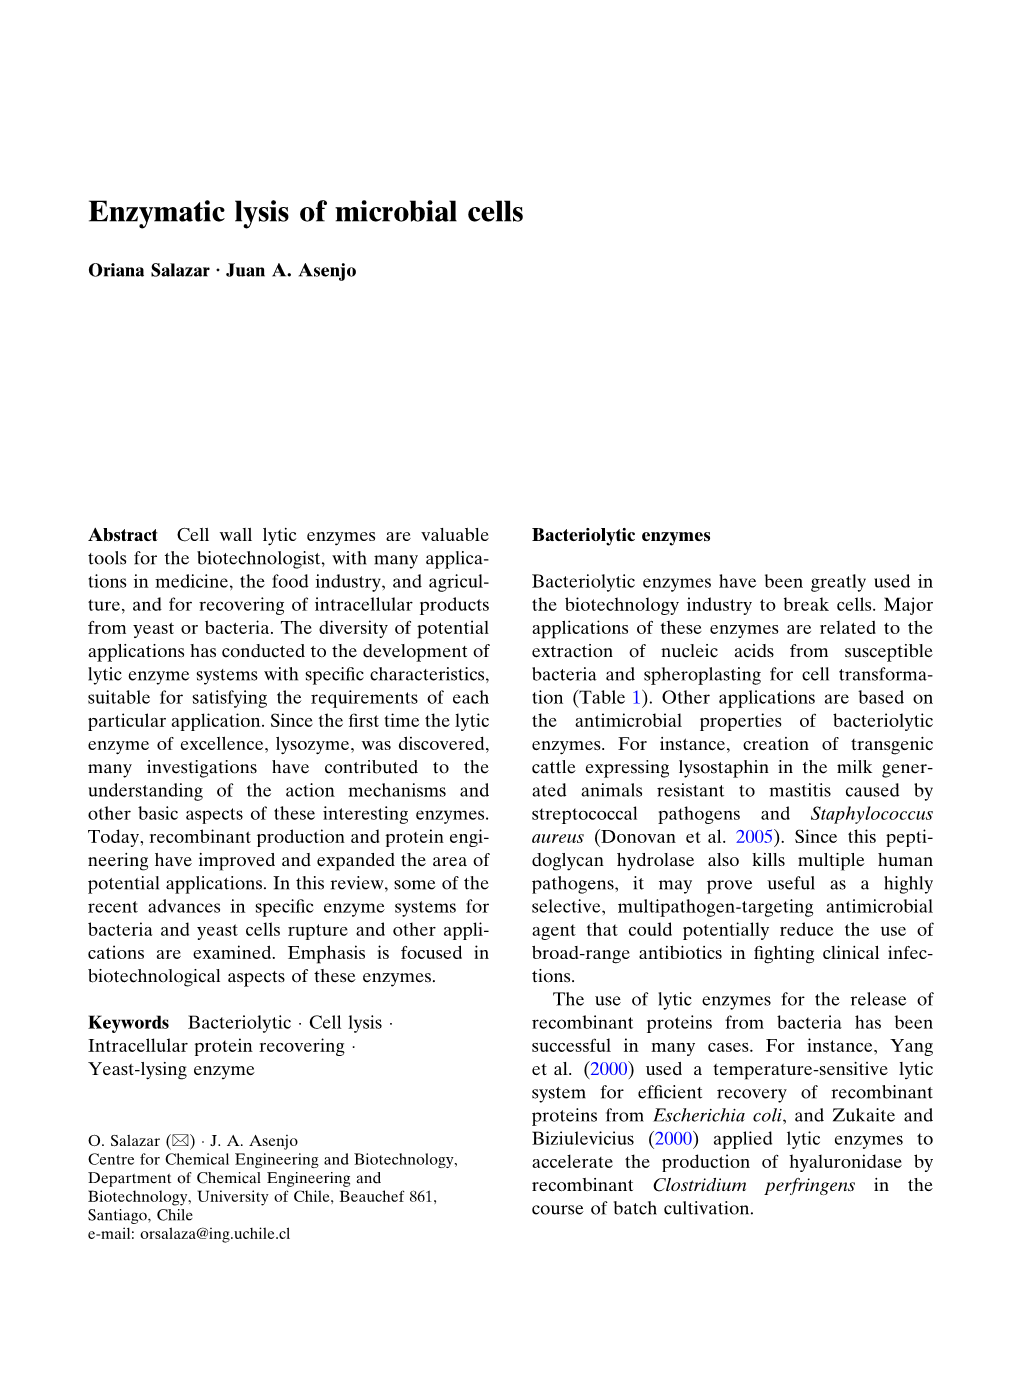 Enzymatic Lysis of Microbial Cells